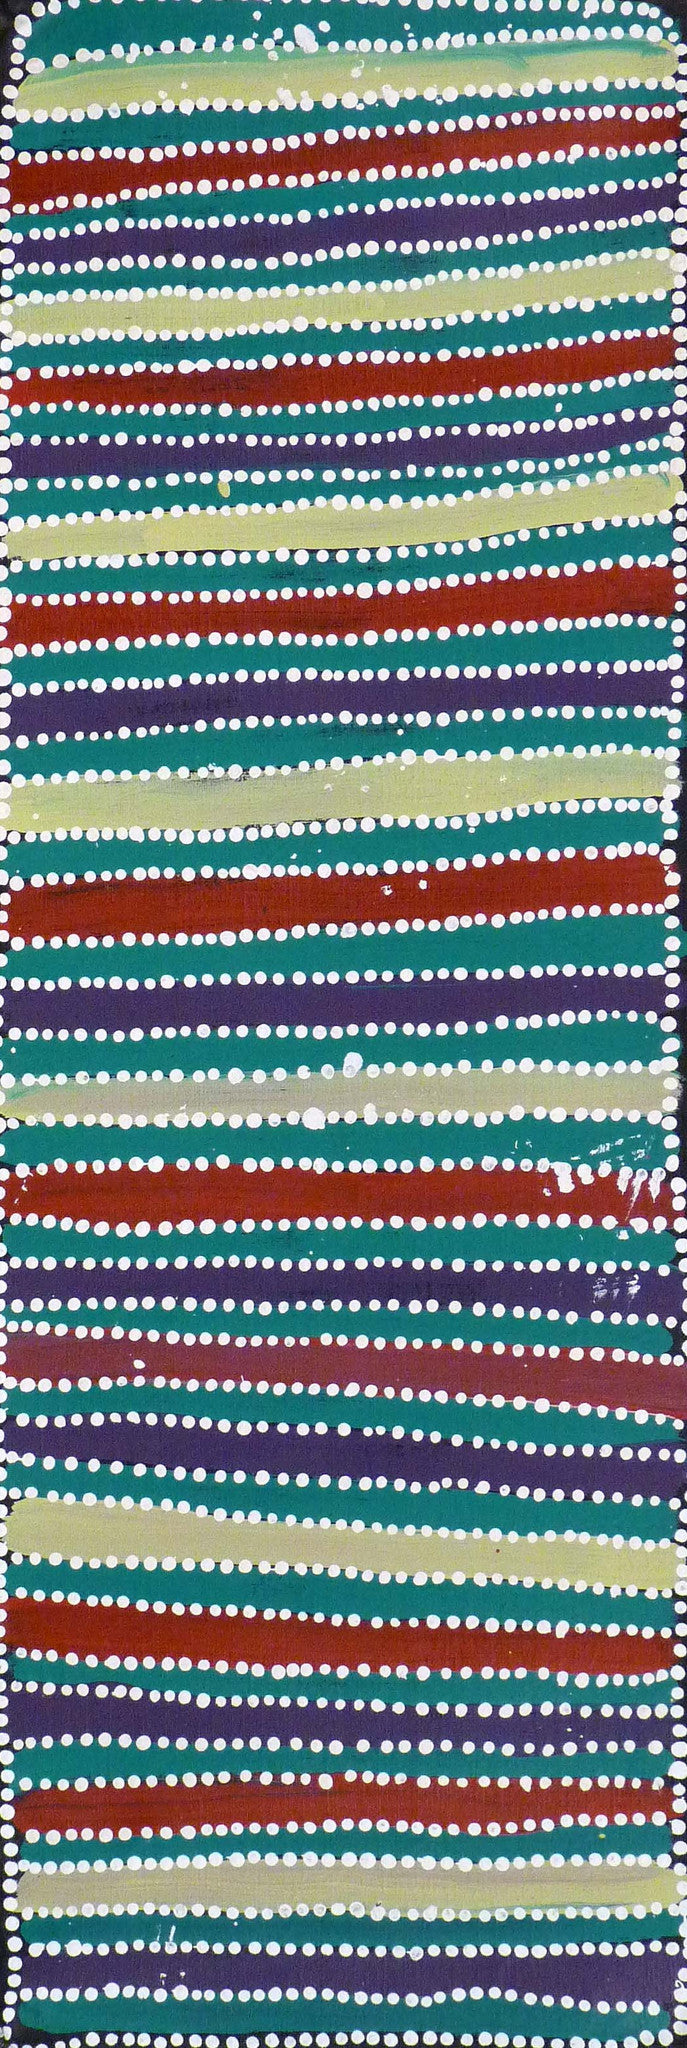 Aboriginal dot painting by Greeny Purvis Petyarre. Learn more at Utopia Lane.